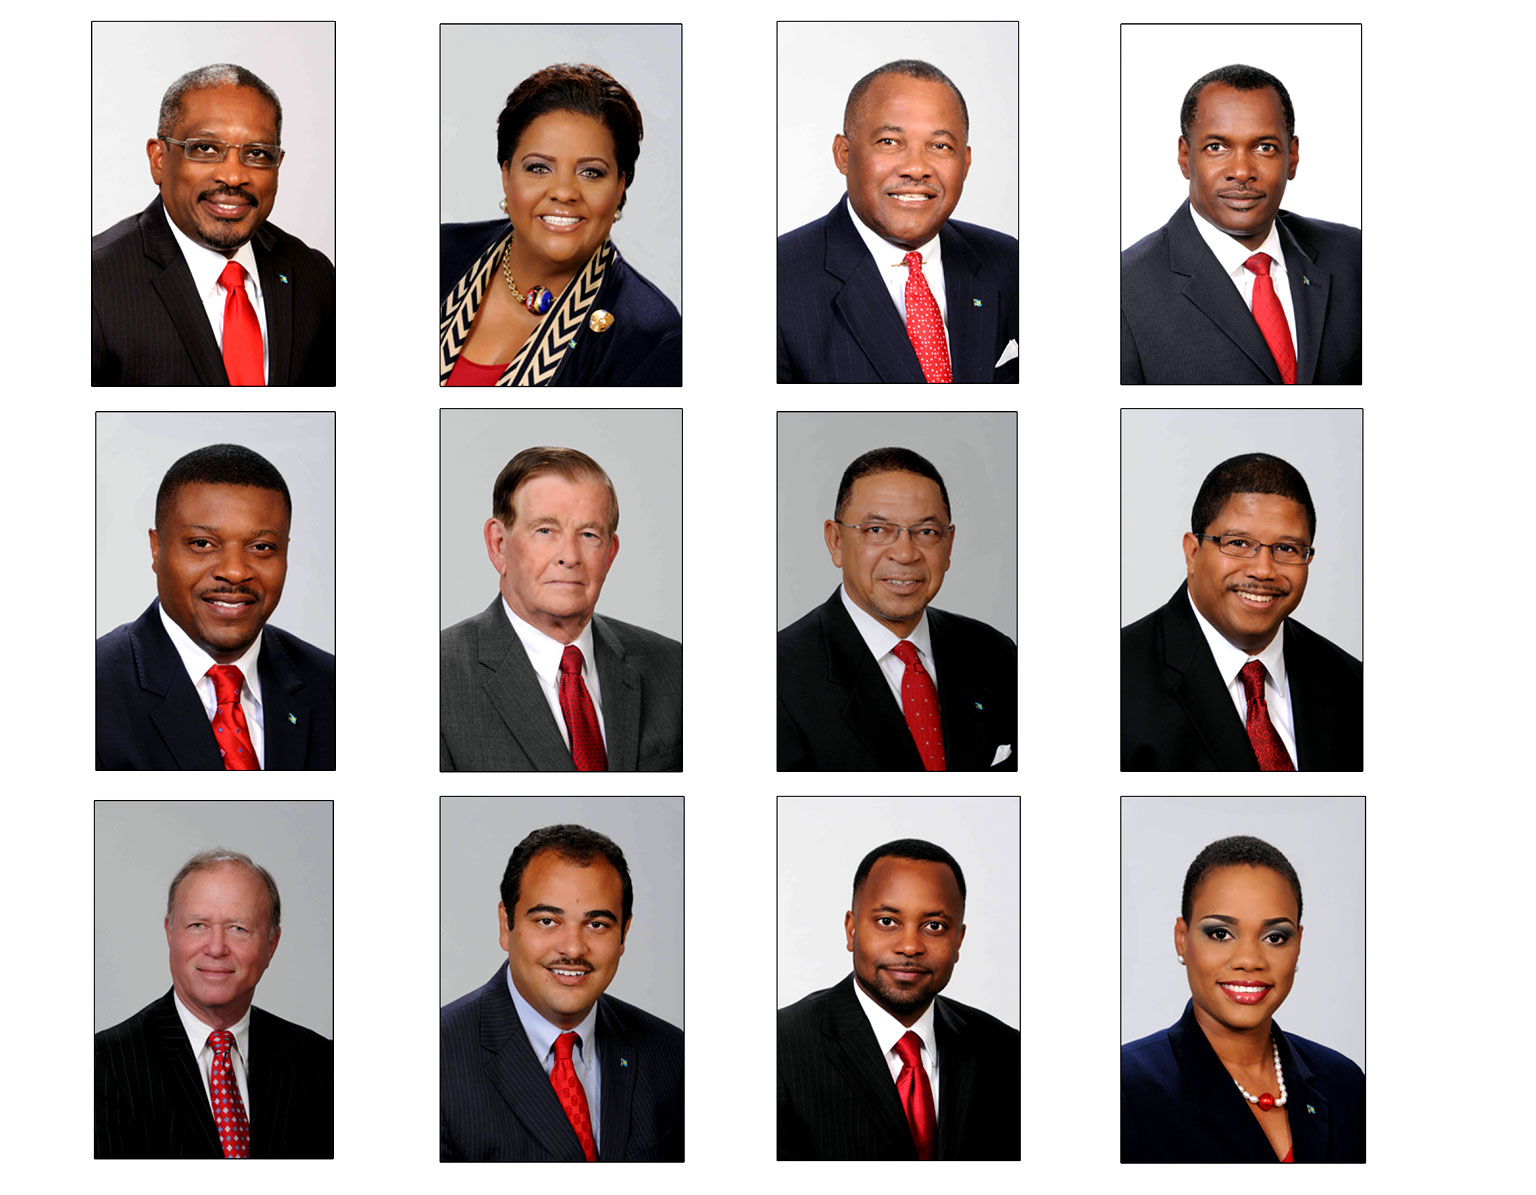 Government ministers of the Bahamas